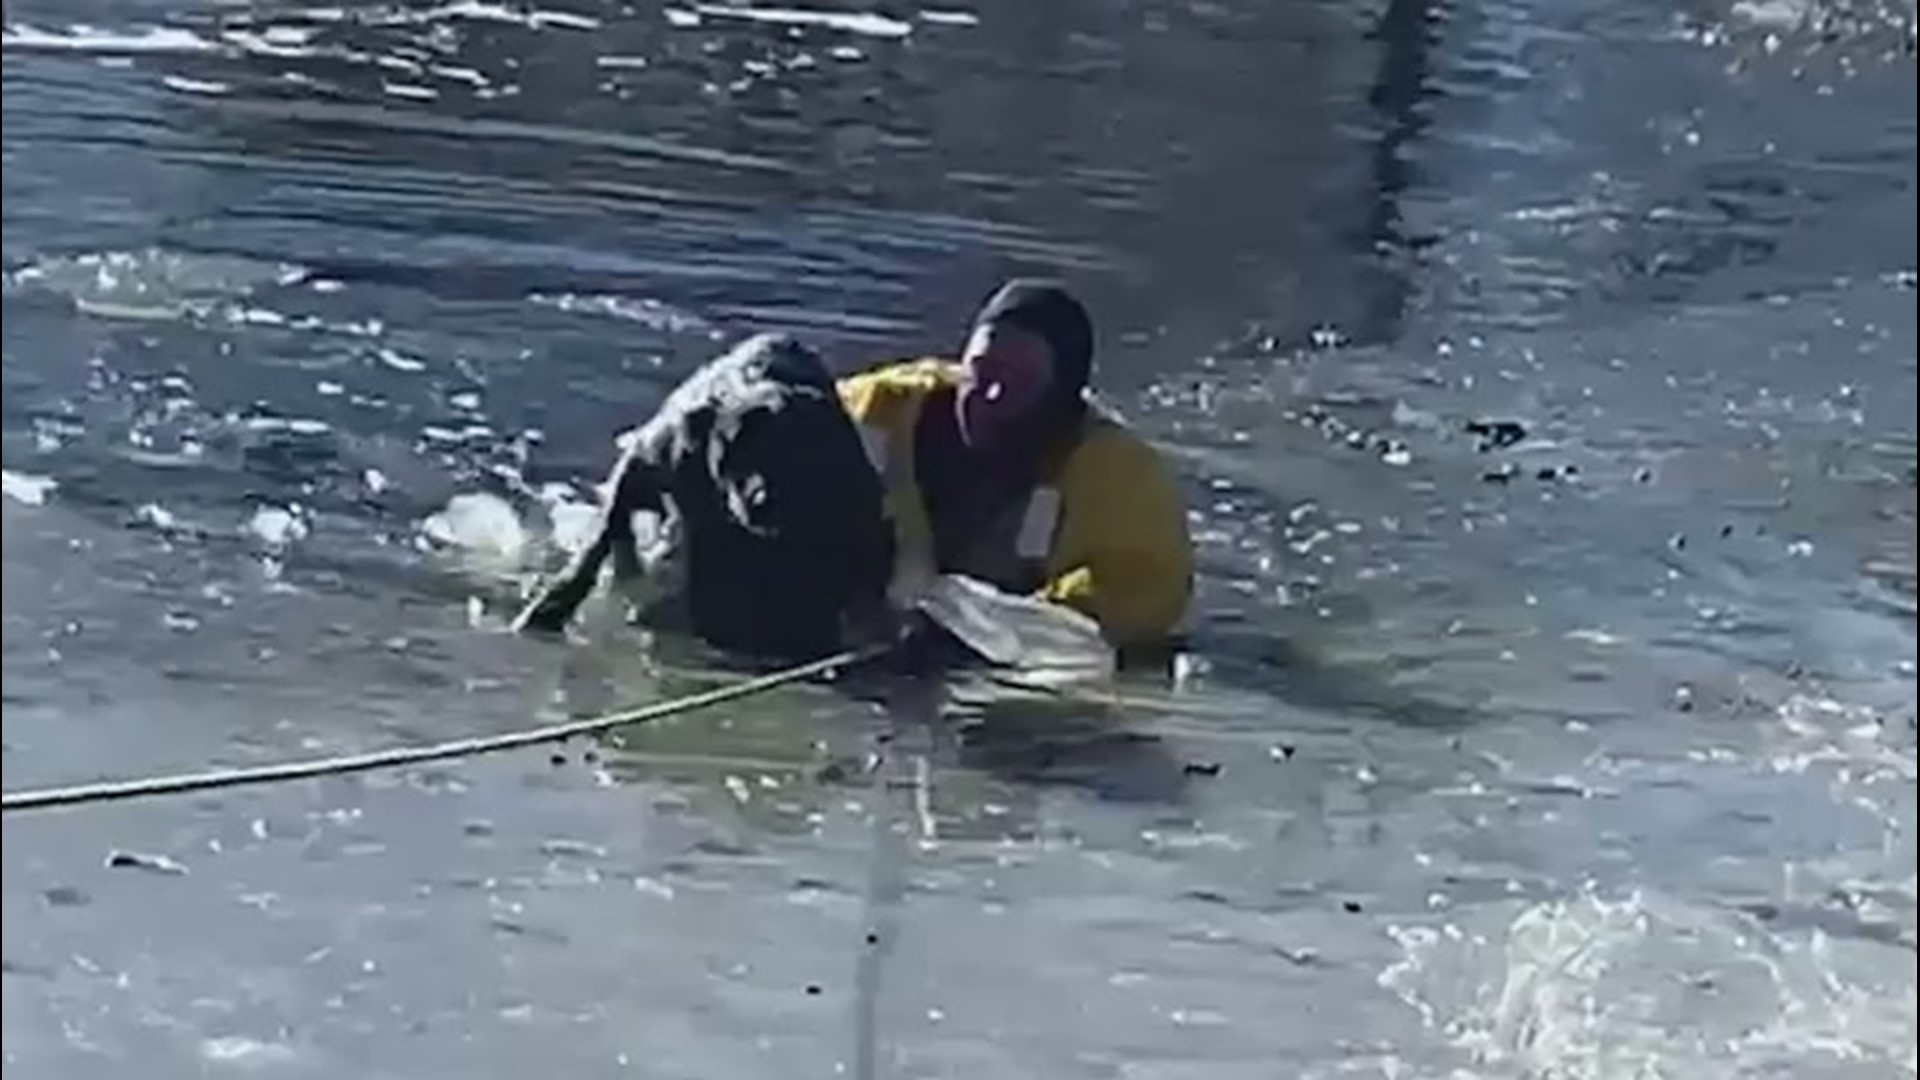 Firefighters responded to a call to rescue a dog trapped in a frozen pond at Sterne Park in Littleton, Colorado, on Jan. 16.